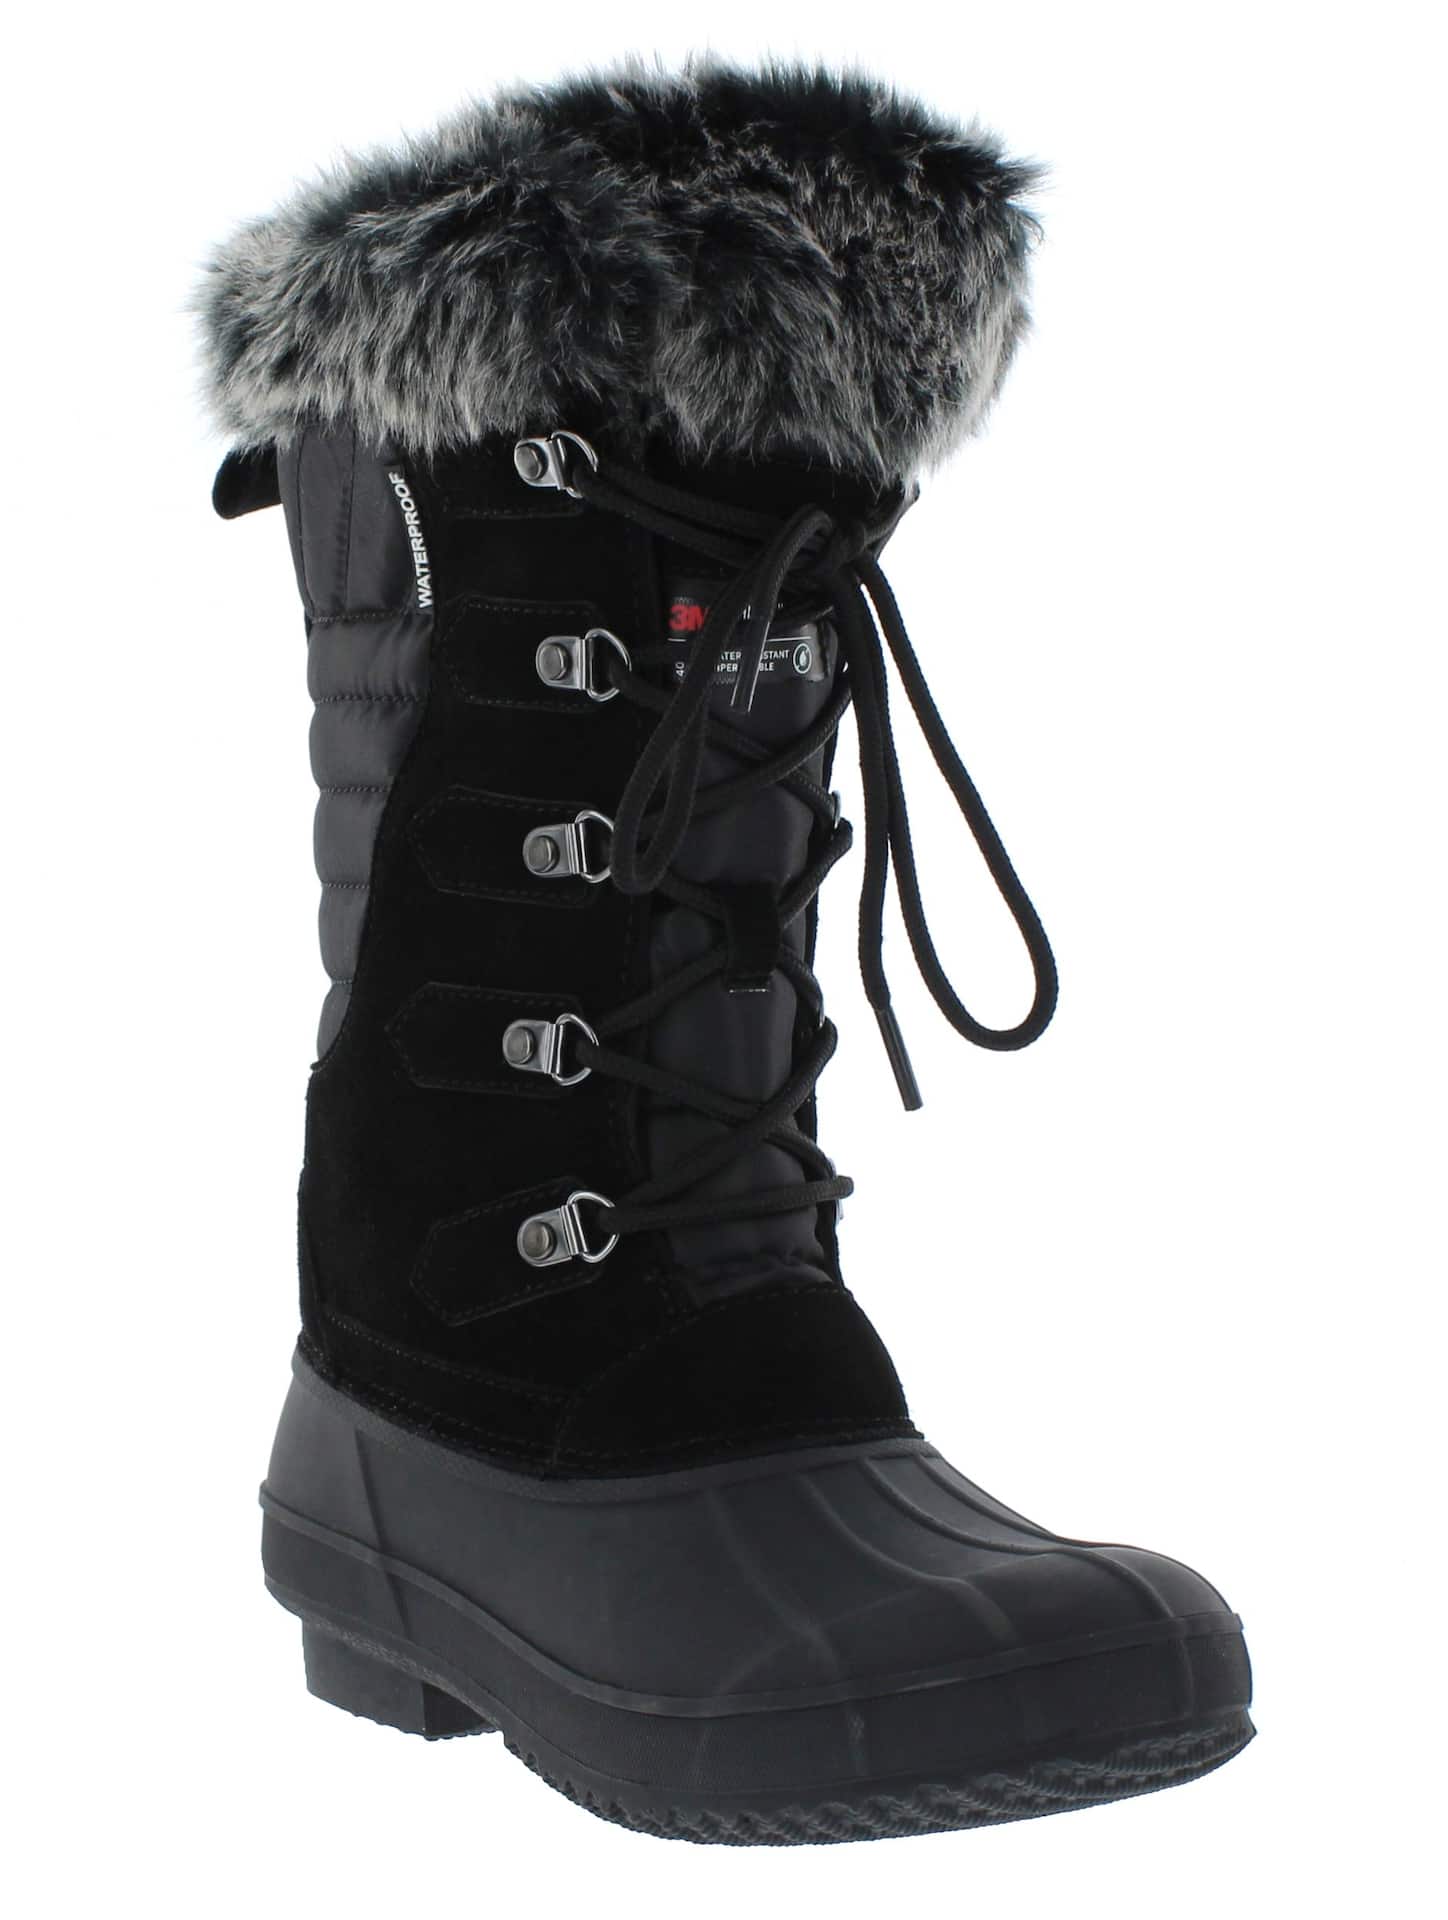 Outbound Women's Sorkin Insulated Leather/Rubber Winter Snow Boots  Waterproof Warm, Black